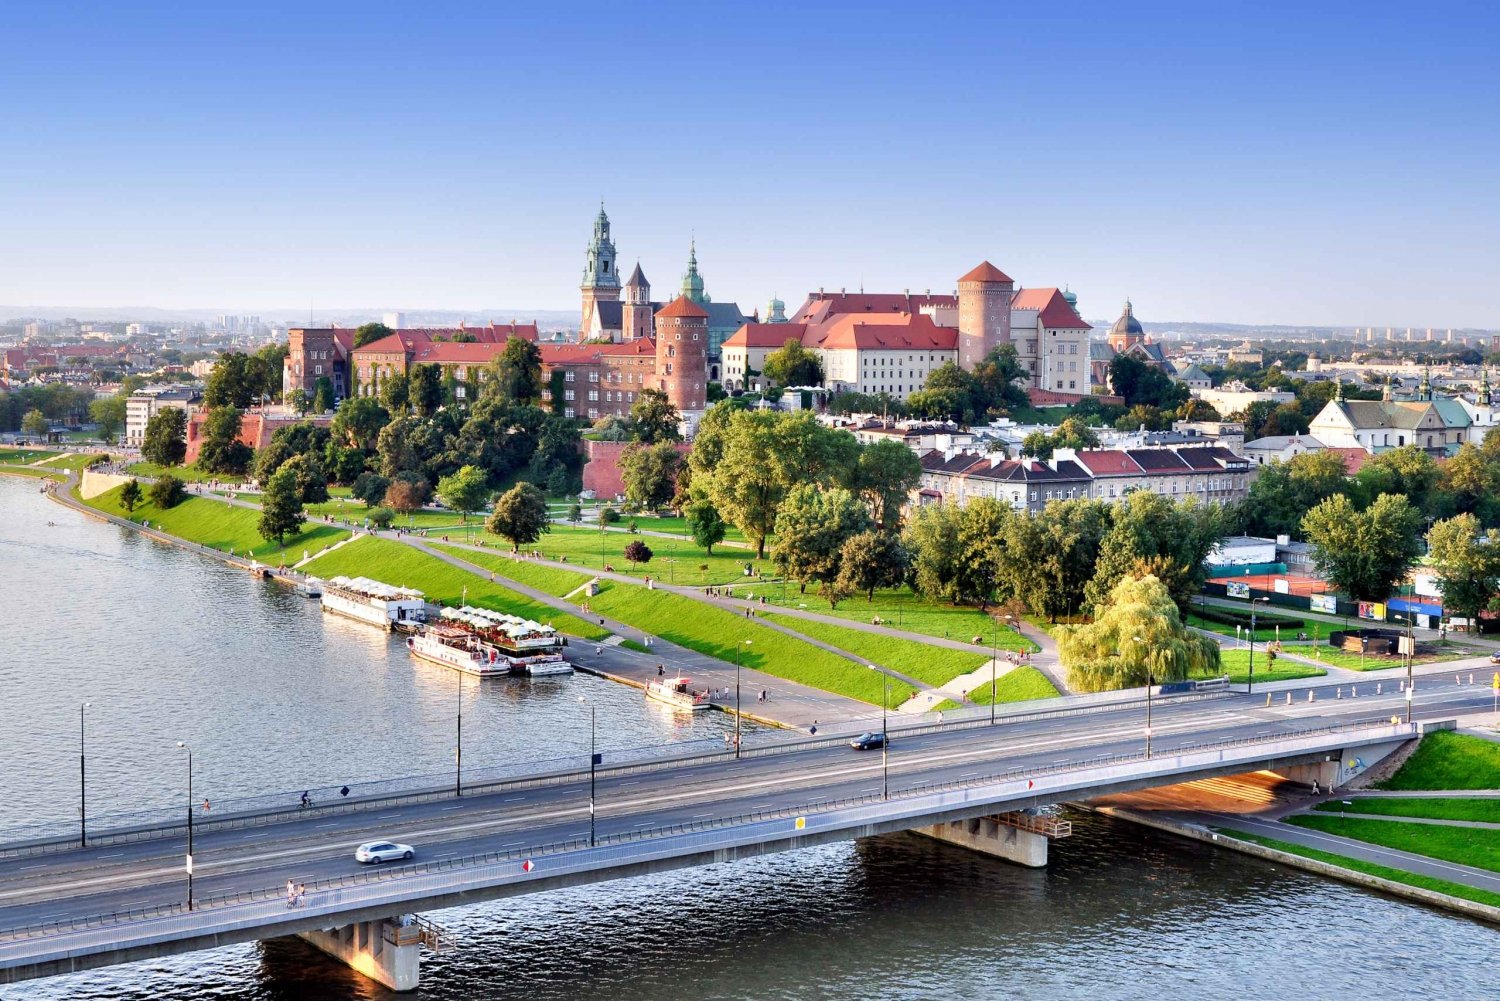 Krakow: Electric Car Tour and Optional Schindler’s Factory